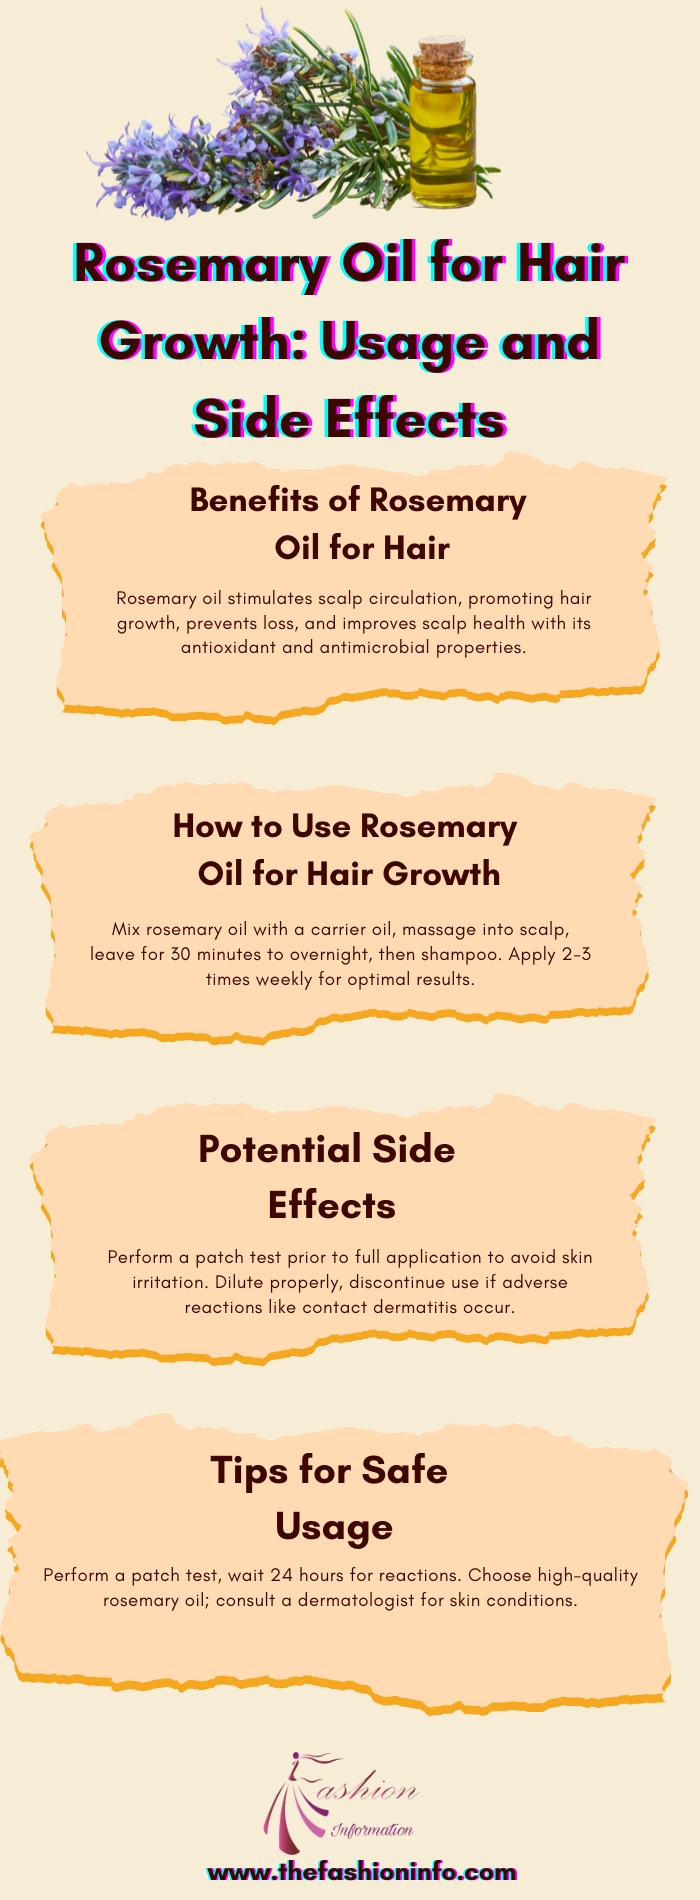 Rosemary Oil for Hair Growth Usage and Side Effects